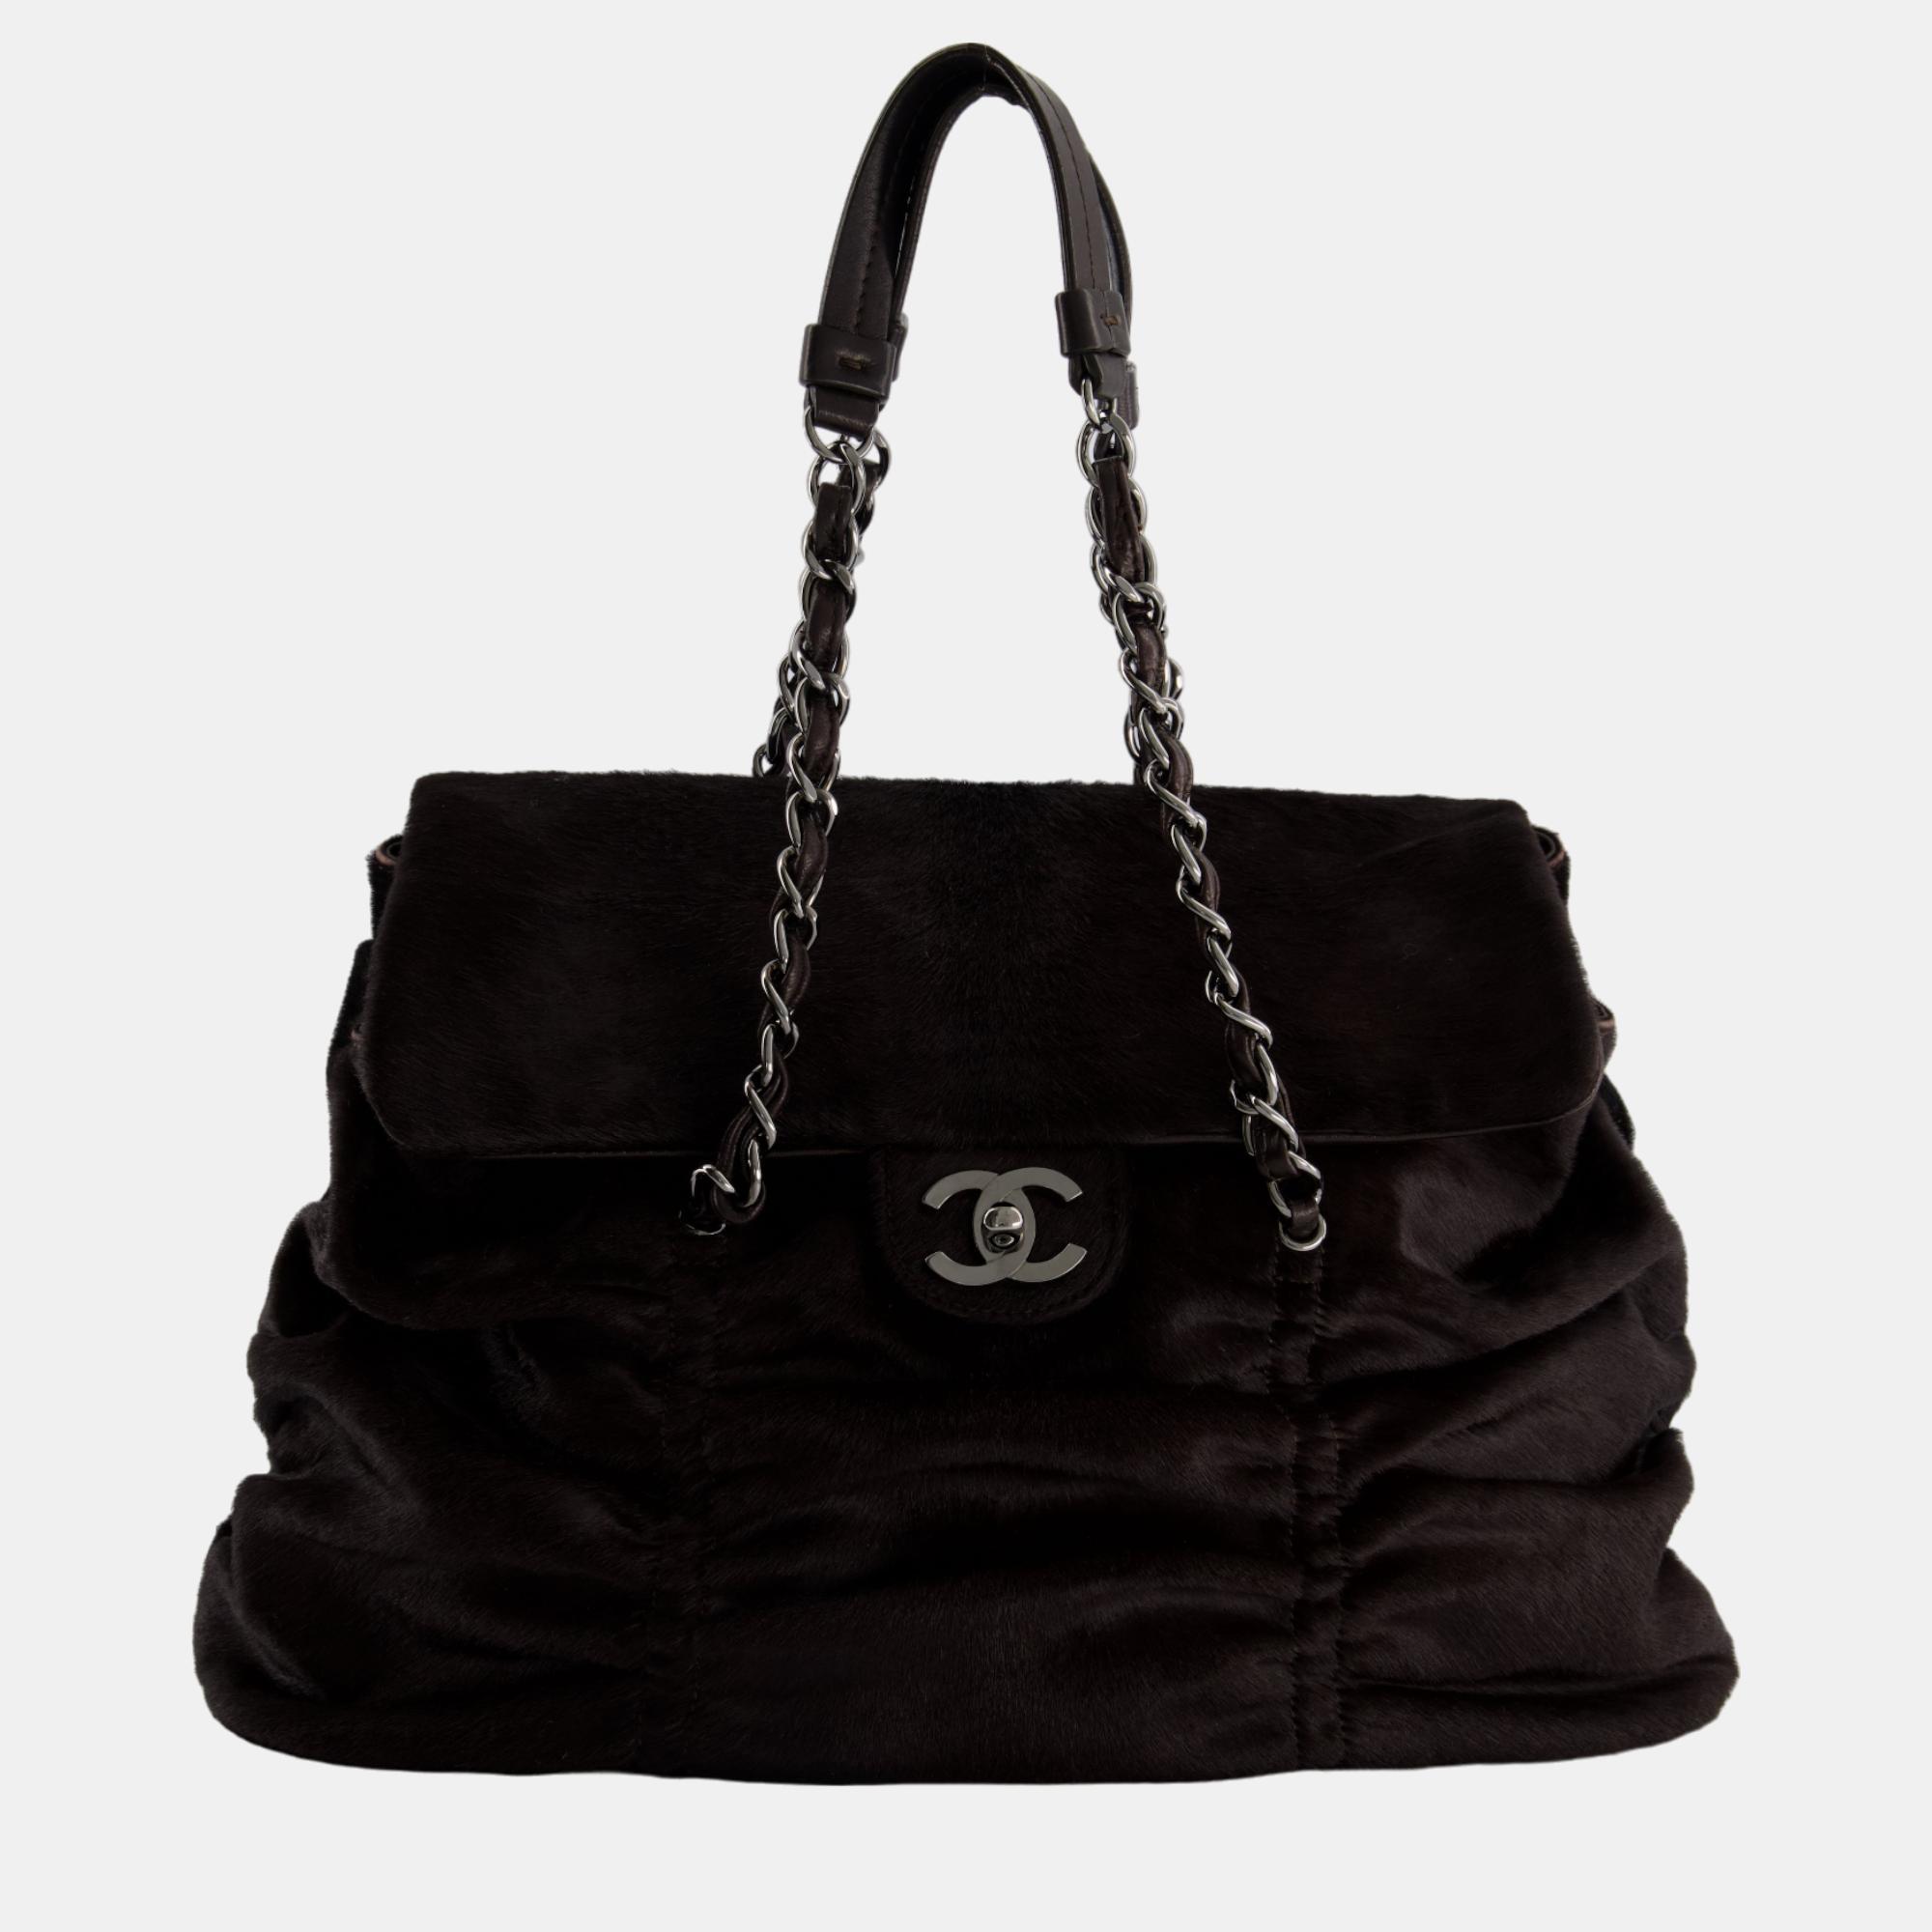 Chanel dark brown pony hair ruched bag with silver hardware